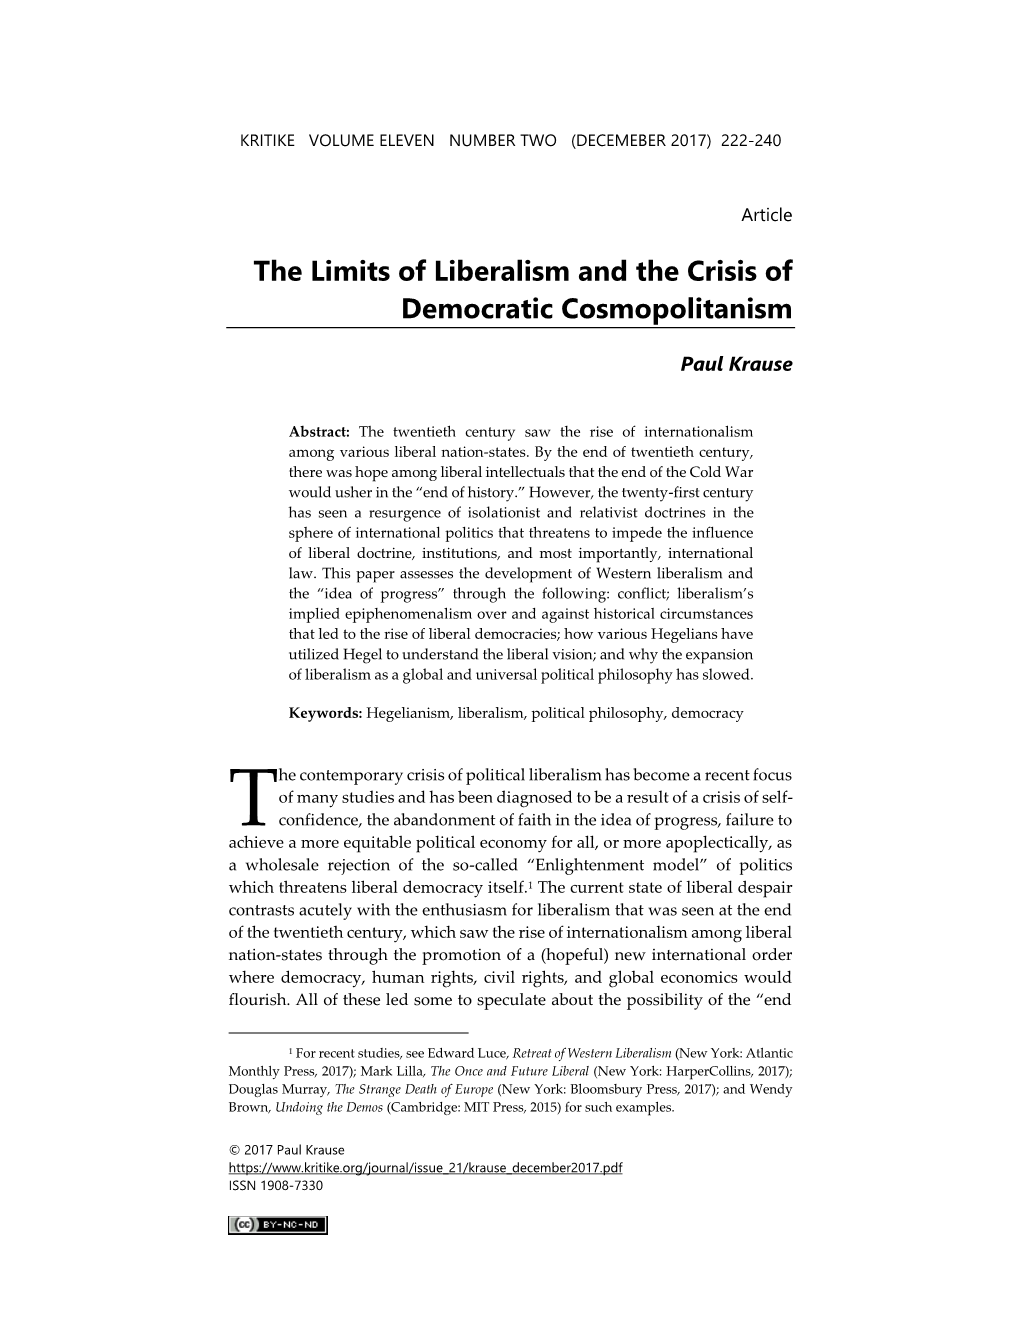 The Limits of Liberalism and the Crisis of Democratic Cosmopolitanism